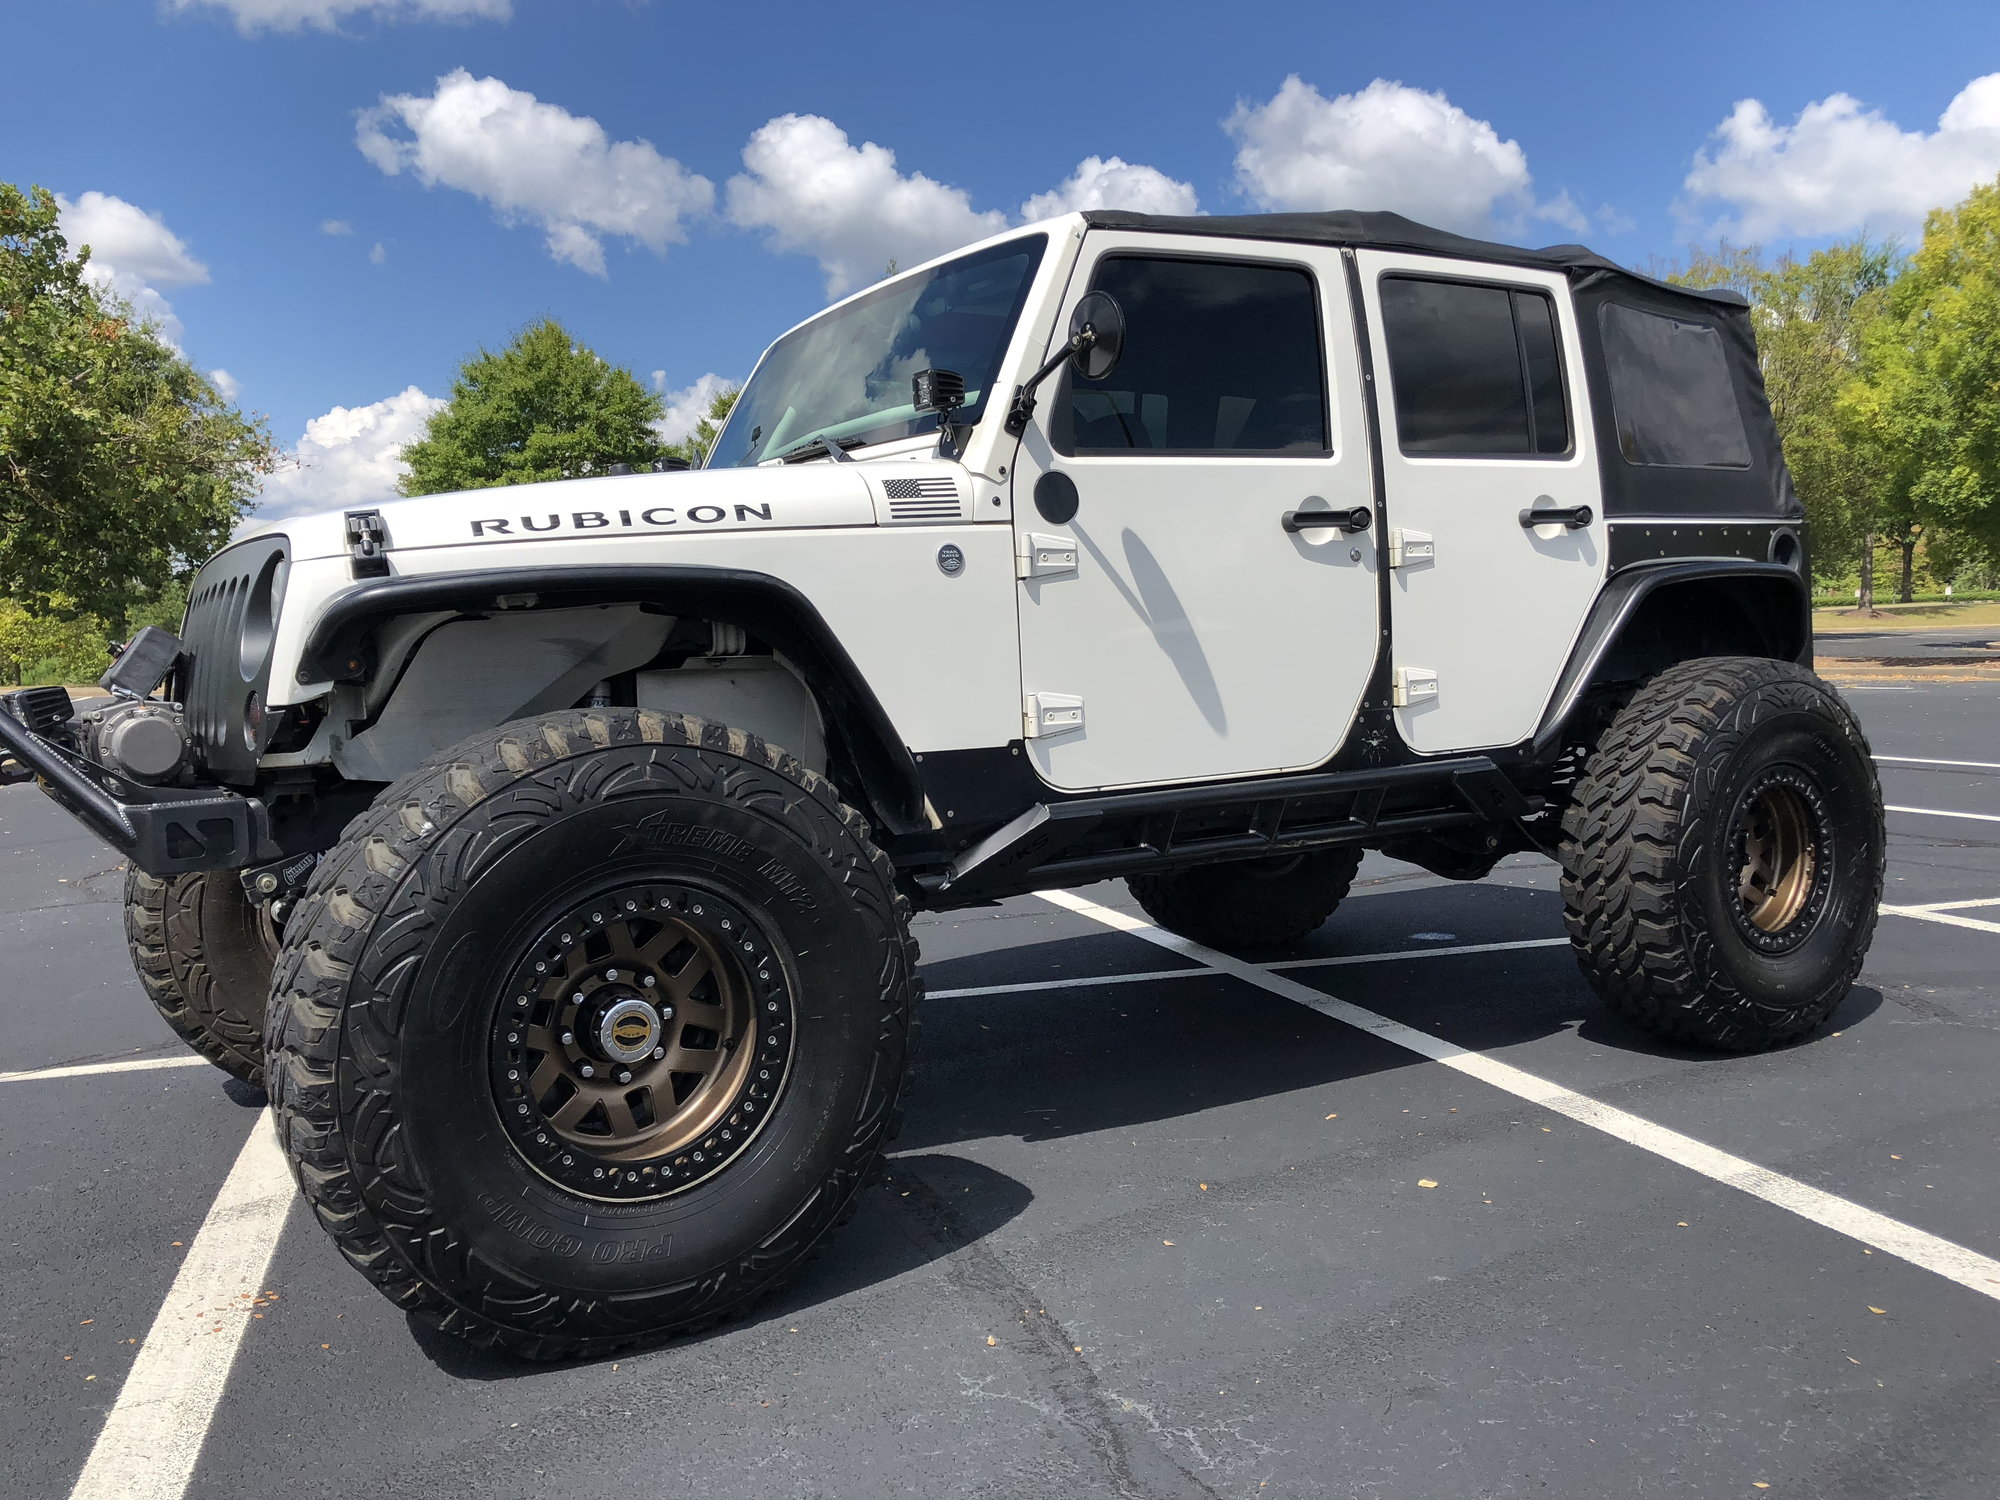 2008 Jeep Wrangler Rubicon Unlimited, Supercharged, Cages, Tons/40's - JK - The top destination for Jeep JK and JL Wrangler news, rumors,  and discussion